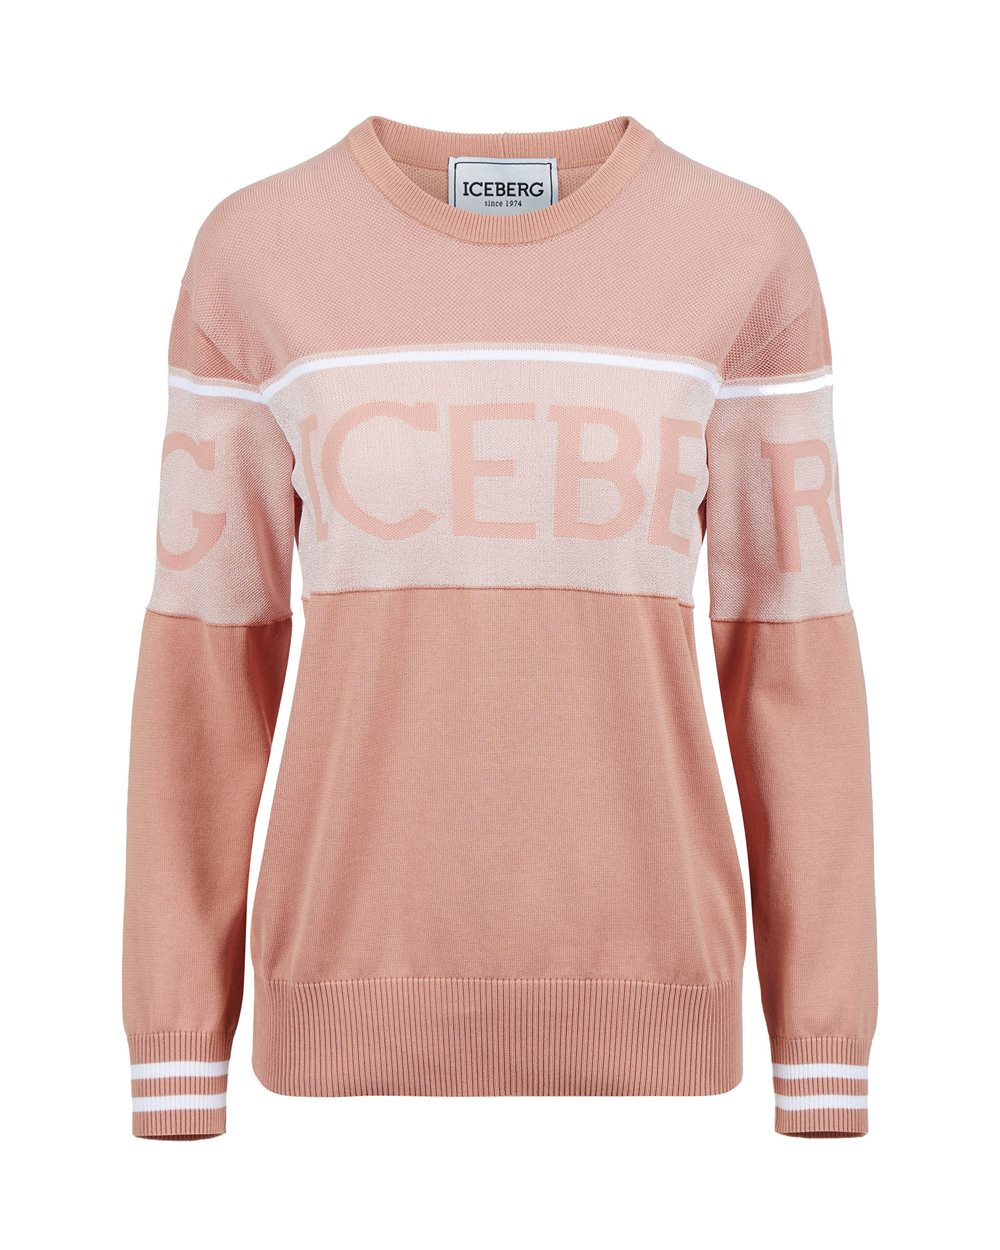 Cotton sweater with logo | Iceberg - Official Website